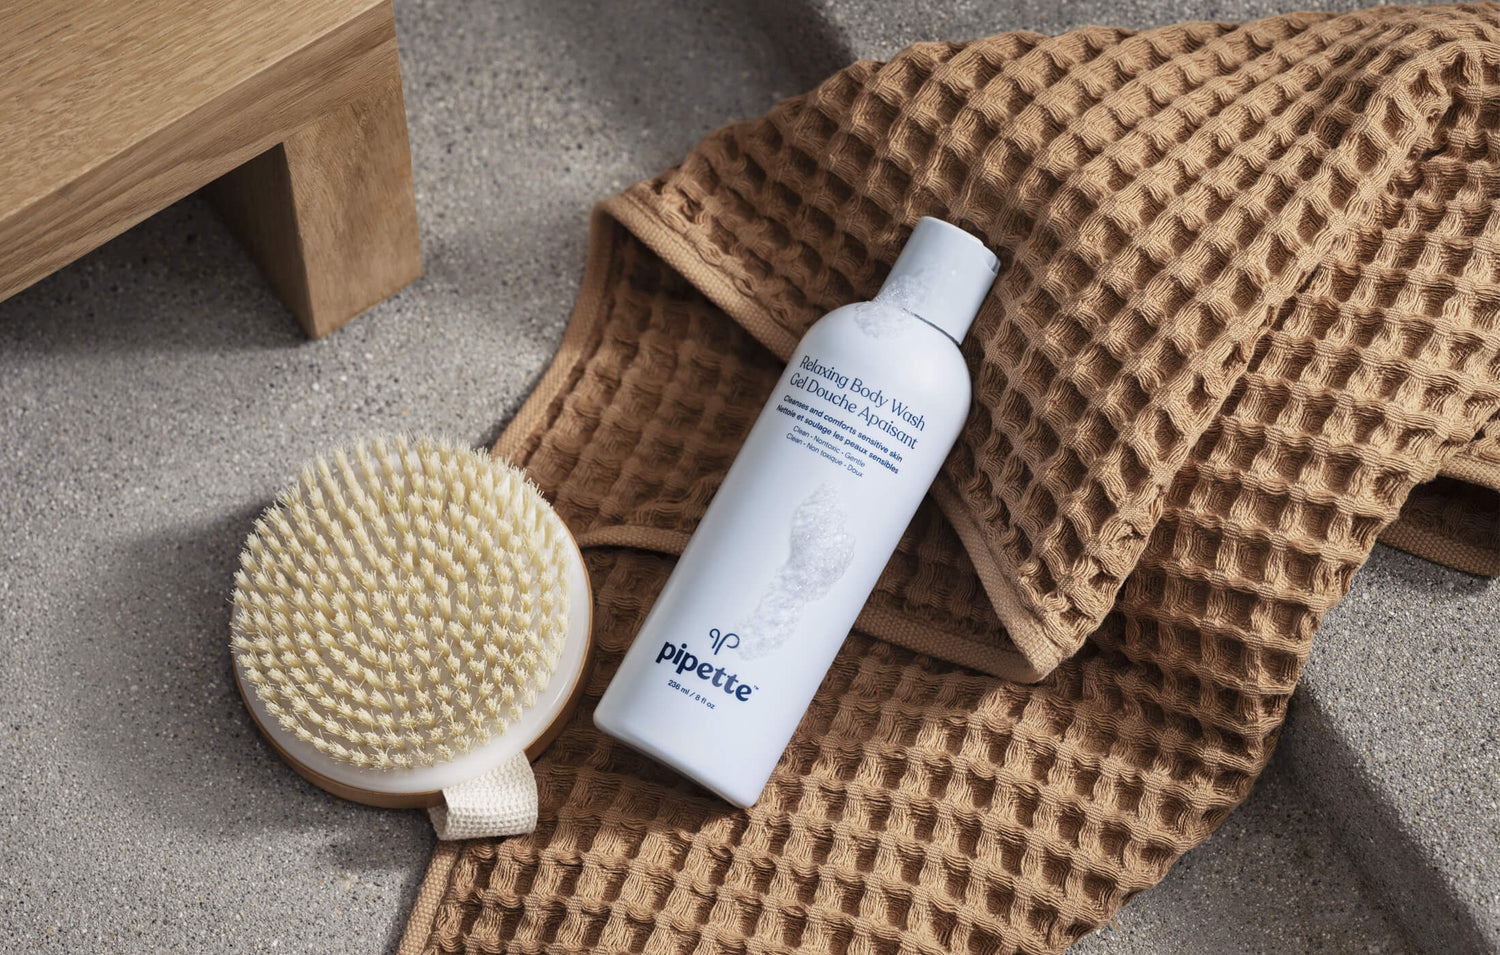 Self-care tips for mom. Pipette Dry Brush & Relaxing Body Wash.